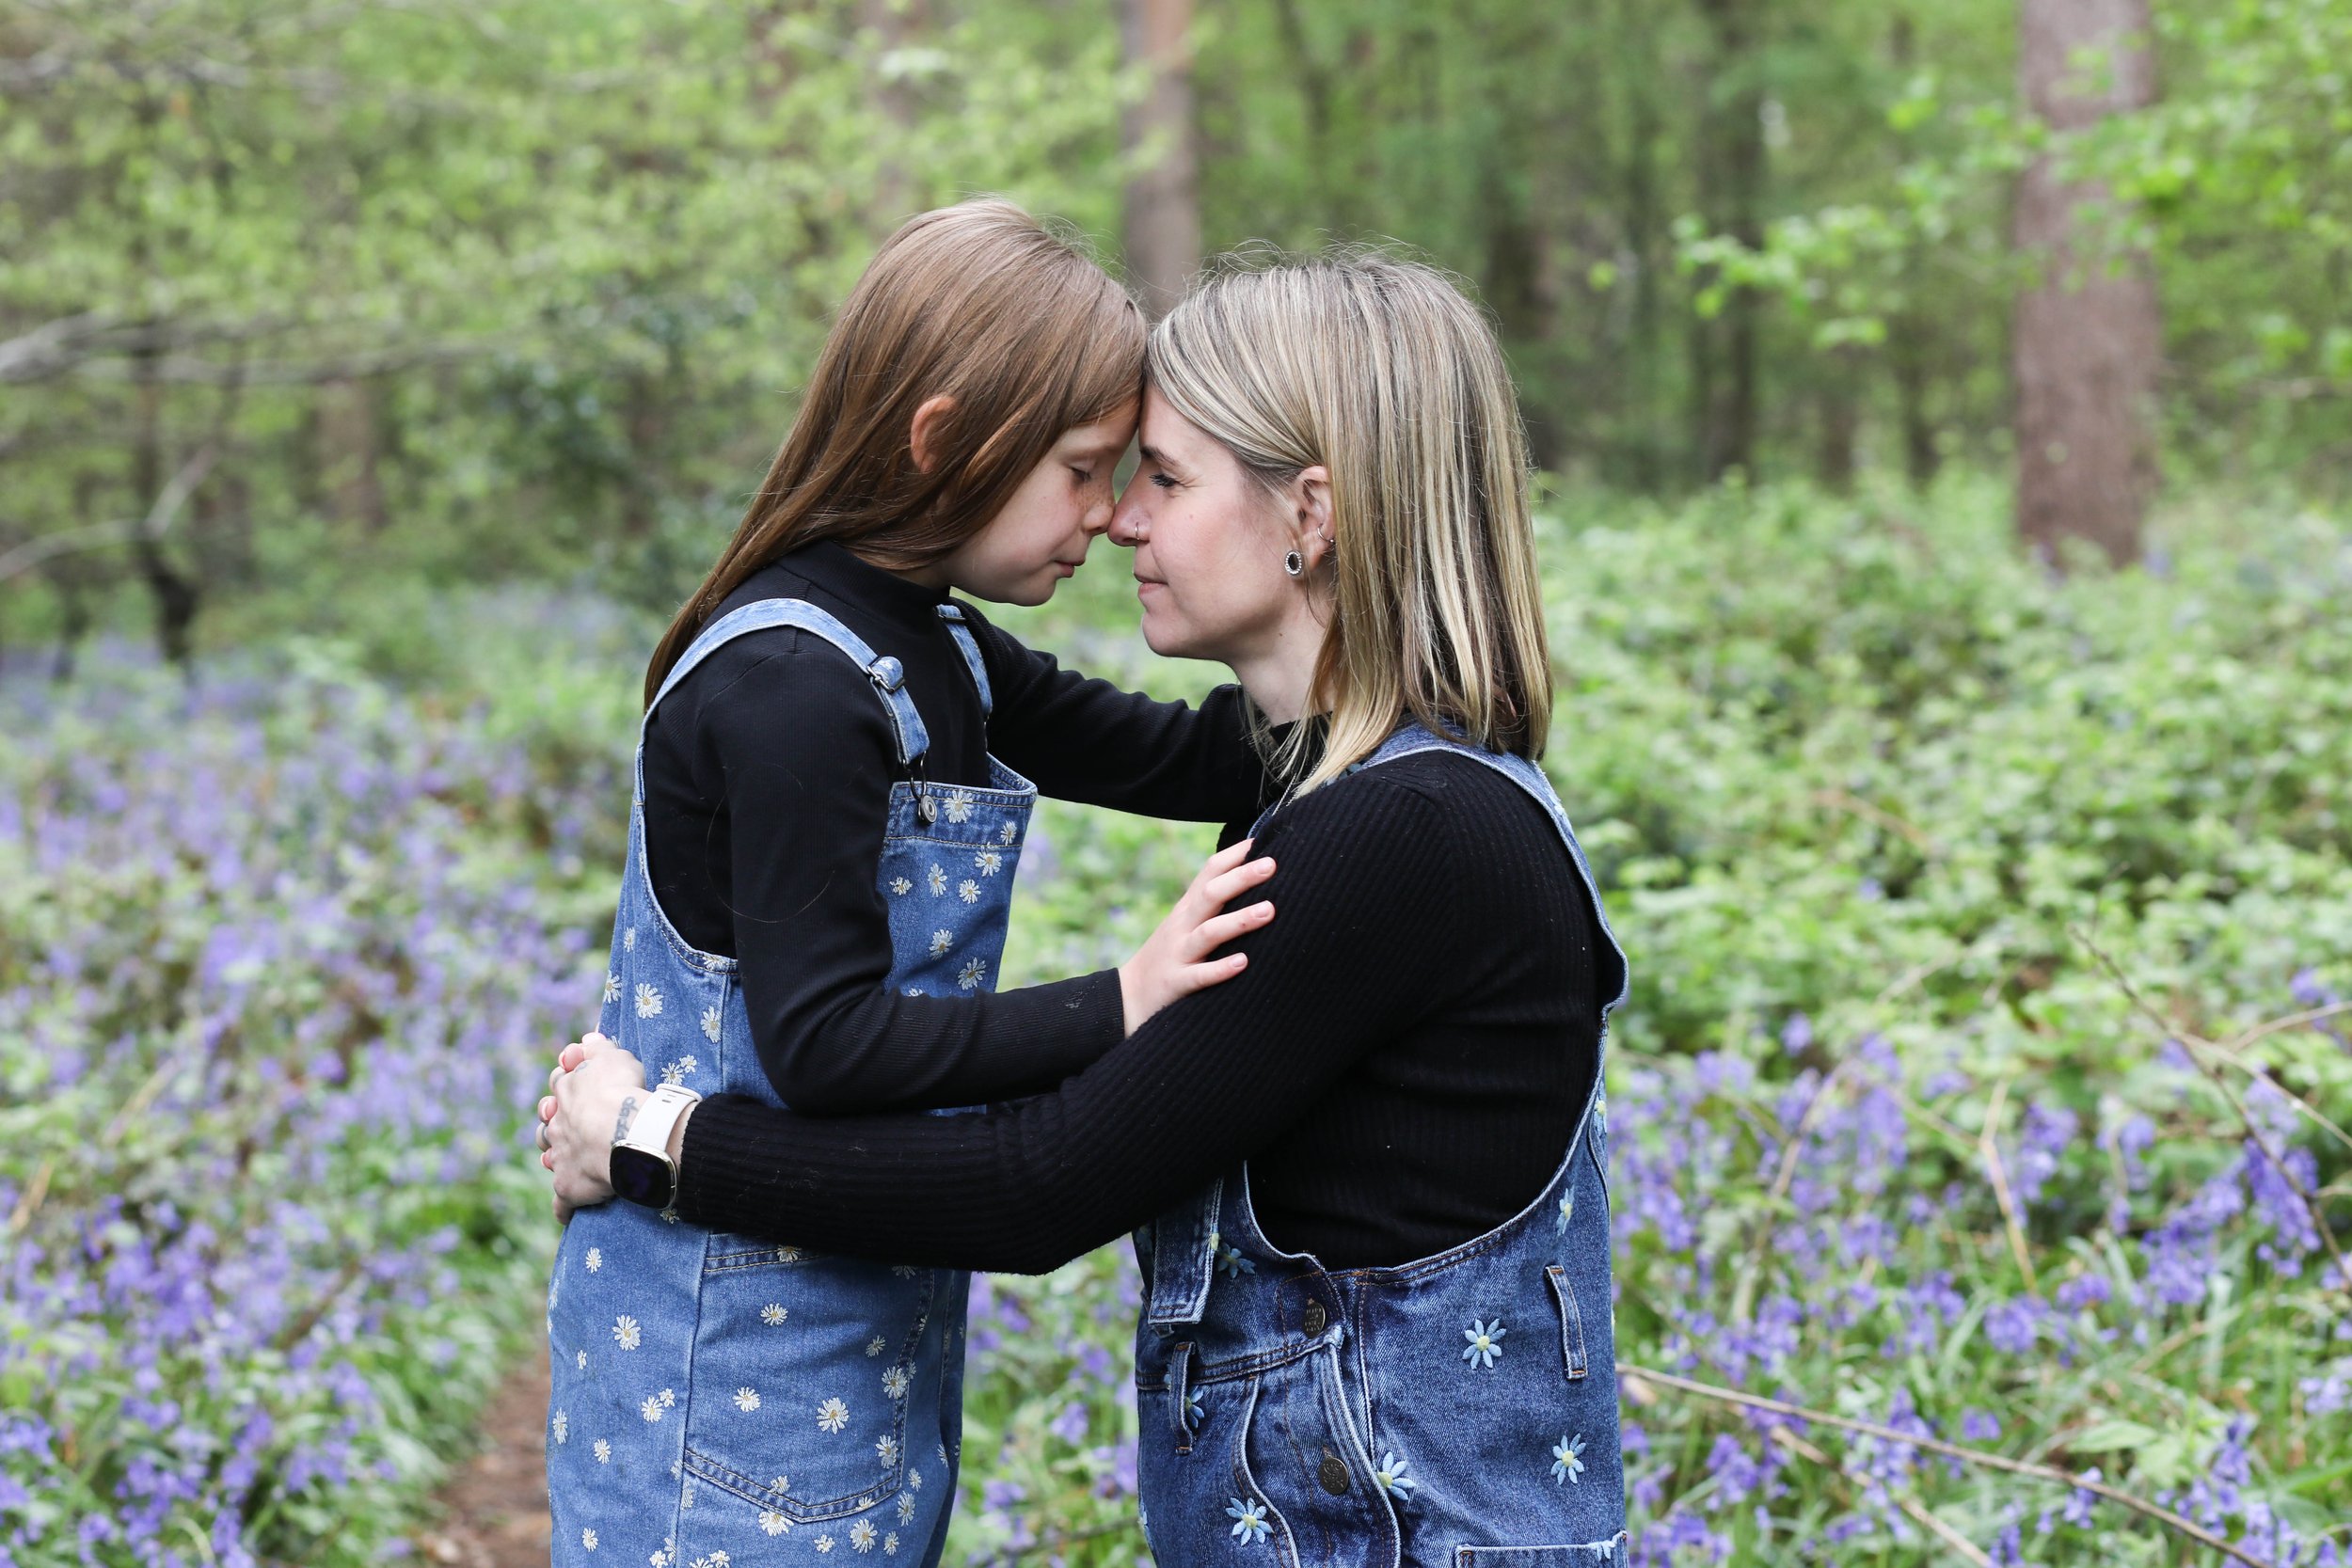 MUM AND DAUGHTER PHOTO SHOOT IN THE BLUEBELLS | BERKSHIRE PORTRAIT SHOOTS46 choice .JPG